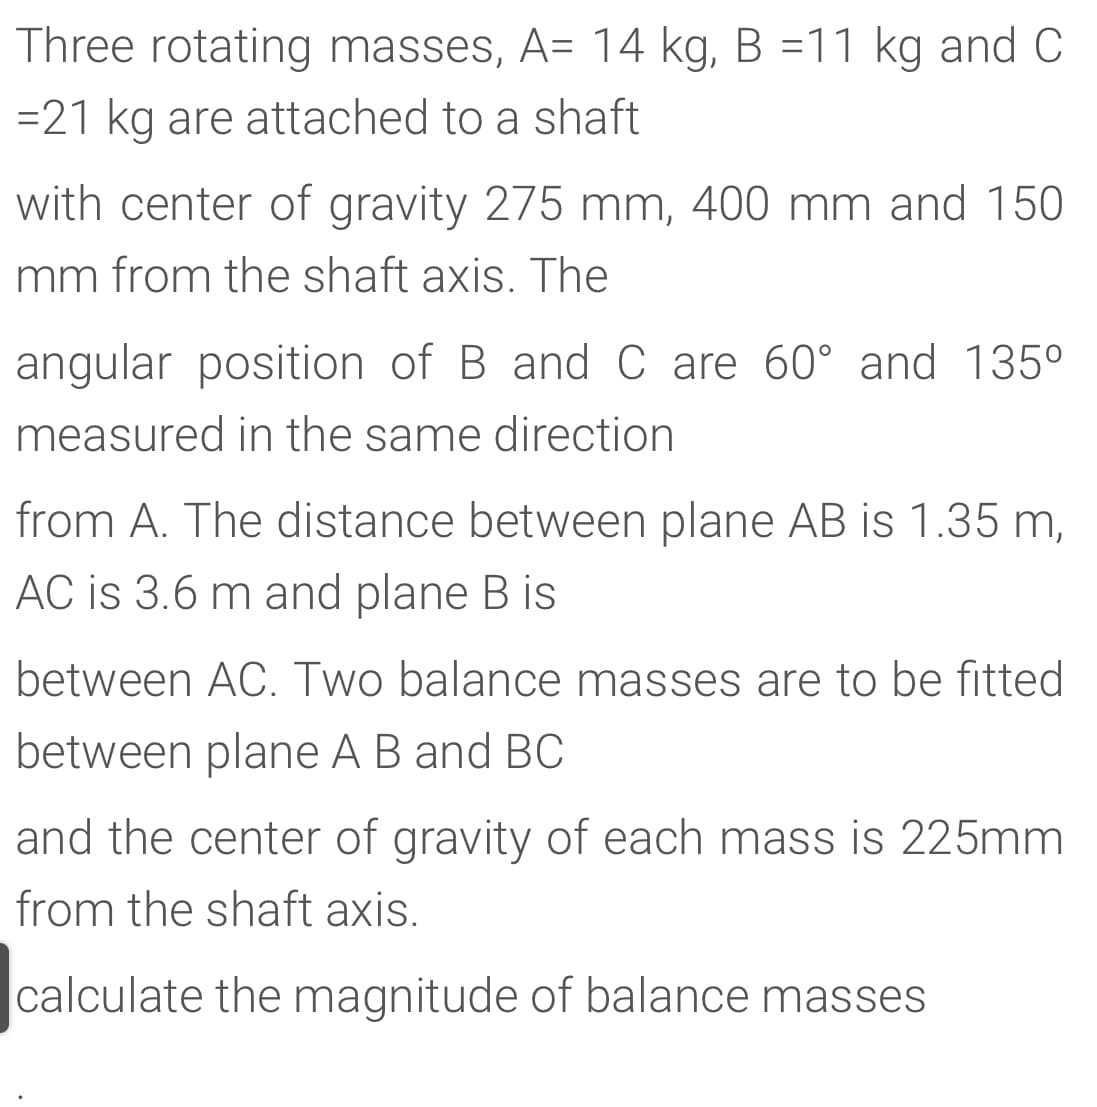 Three rotating masses, A= 14 kg, B =11 kg and C
=21 kg are attached to a shaft
with center of gravity 275 mm, 400 mm and 150
mm from the shaft axis. The
angular position of B andC are 60° and 135°
measured in the same direction
from A. The distance between plane AB is 1.35 m,
AC is 3.6 m and plane B is
between AC. Two balance masses are to be fitted
between plane A B and BC
and the center of gravity of each mass is 225mm
from the shaft axis.
calculate the magnitude of balance masses
